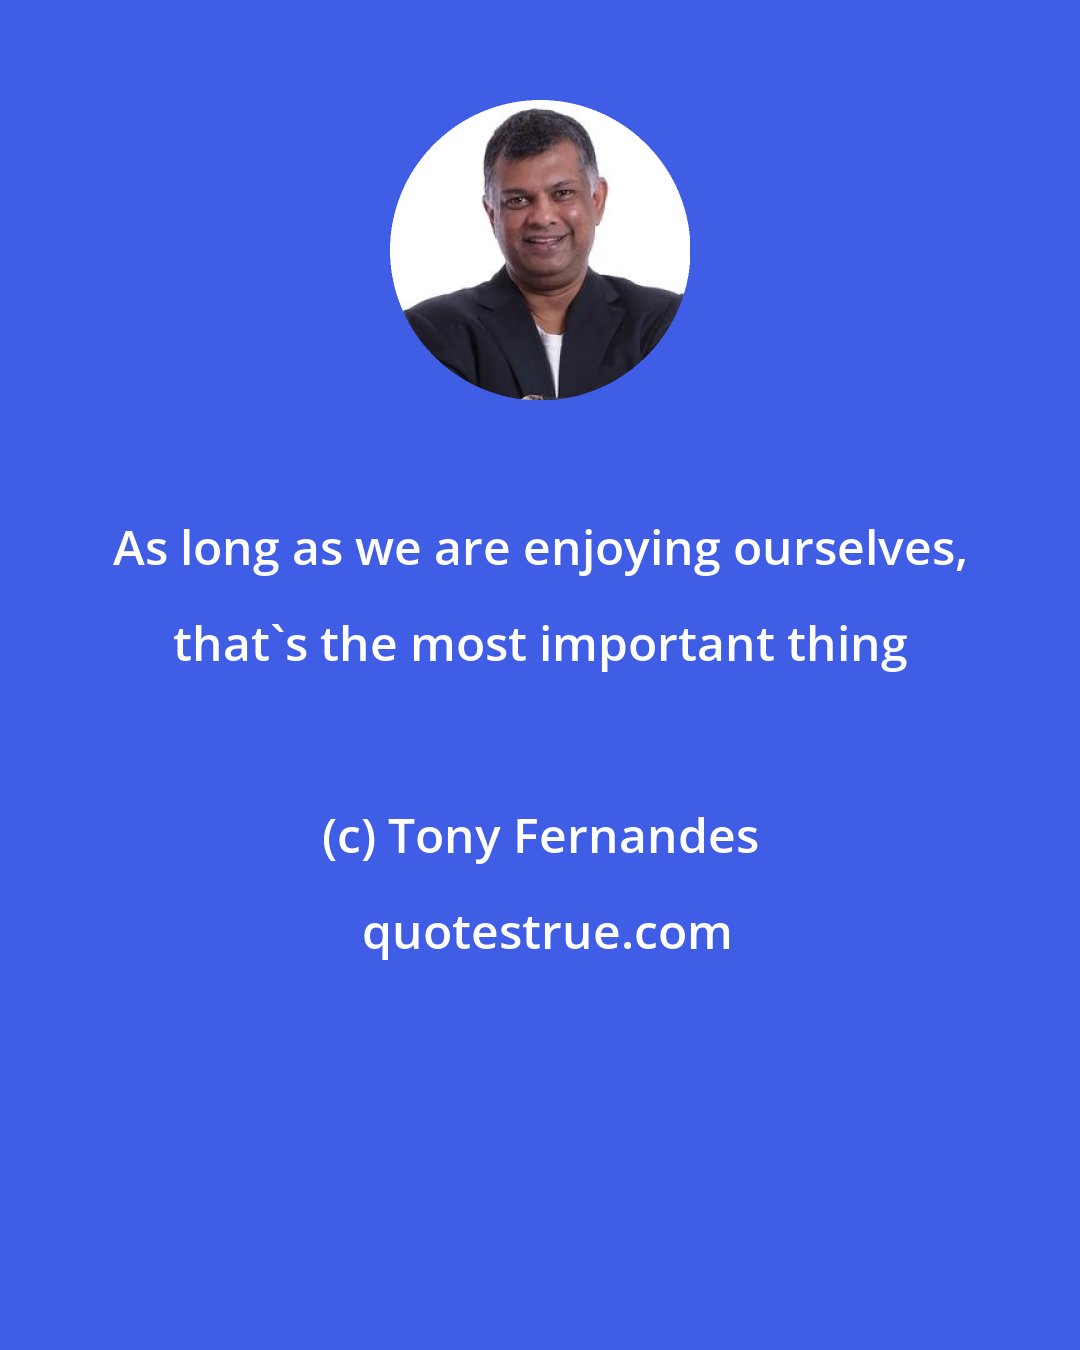 Tony Fernandes: As long as we are enjoying ourselves, that's the most important thing